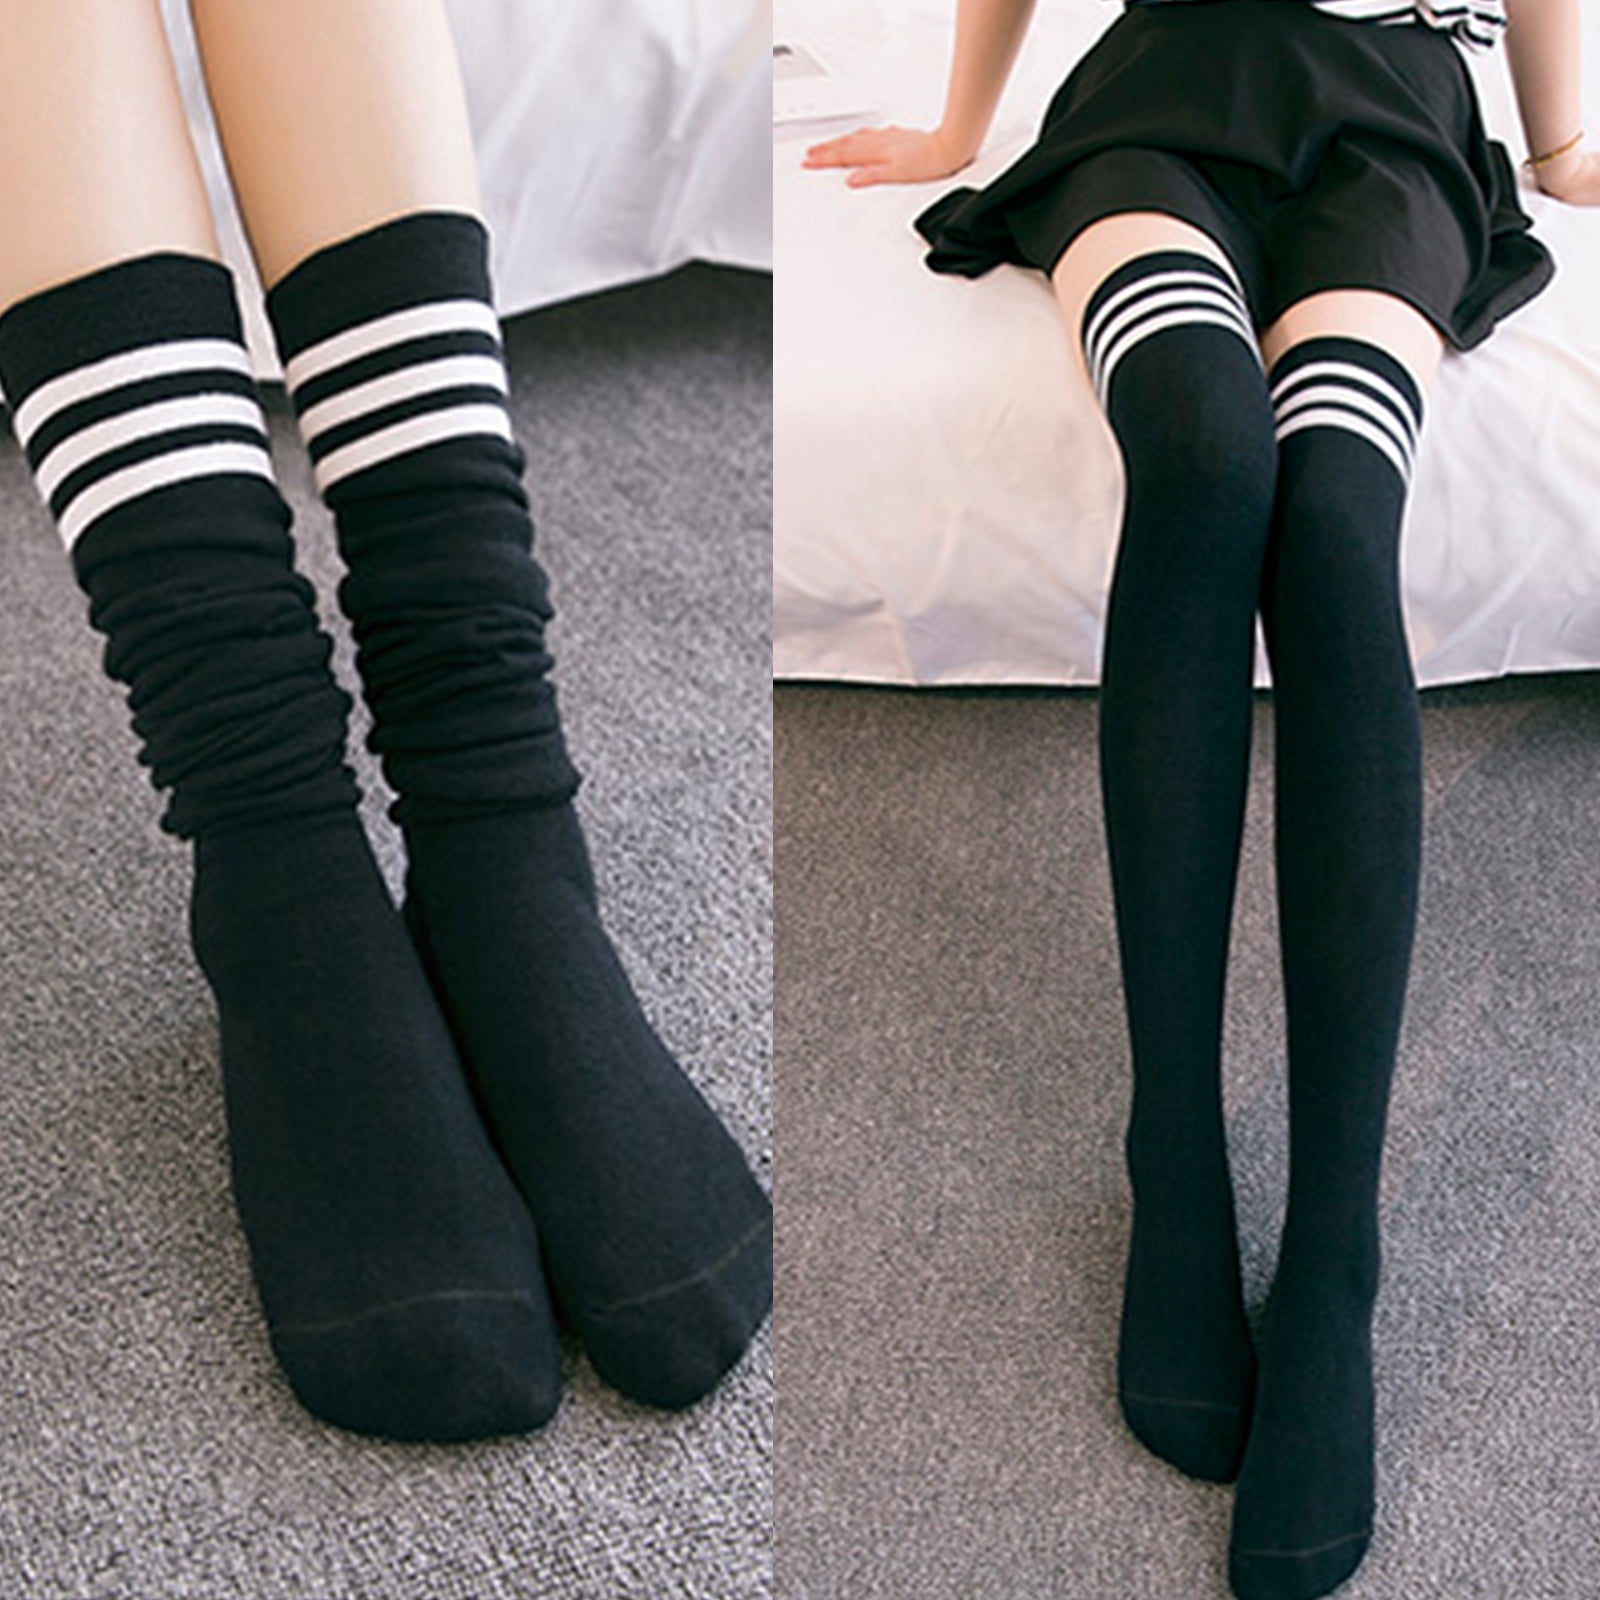 Loritta 6 Pairs Womens Thigh High Socks, over the Knee High Socks One Size,  Style a 